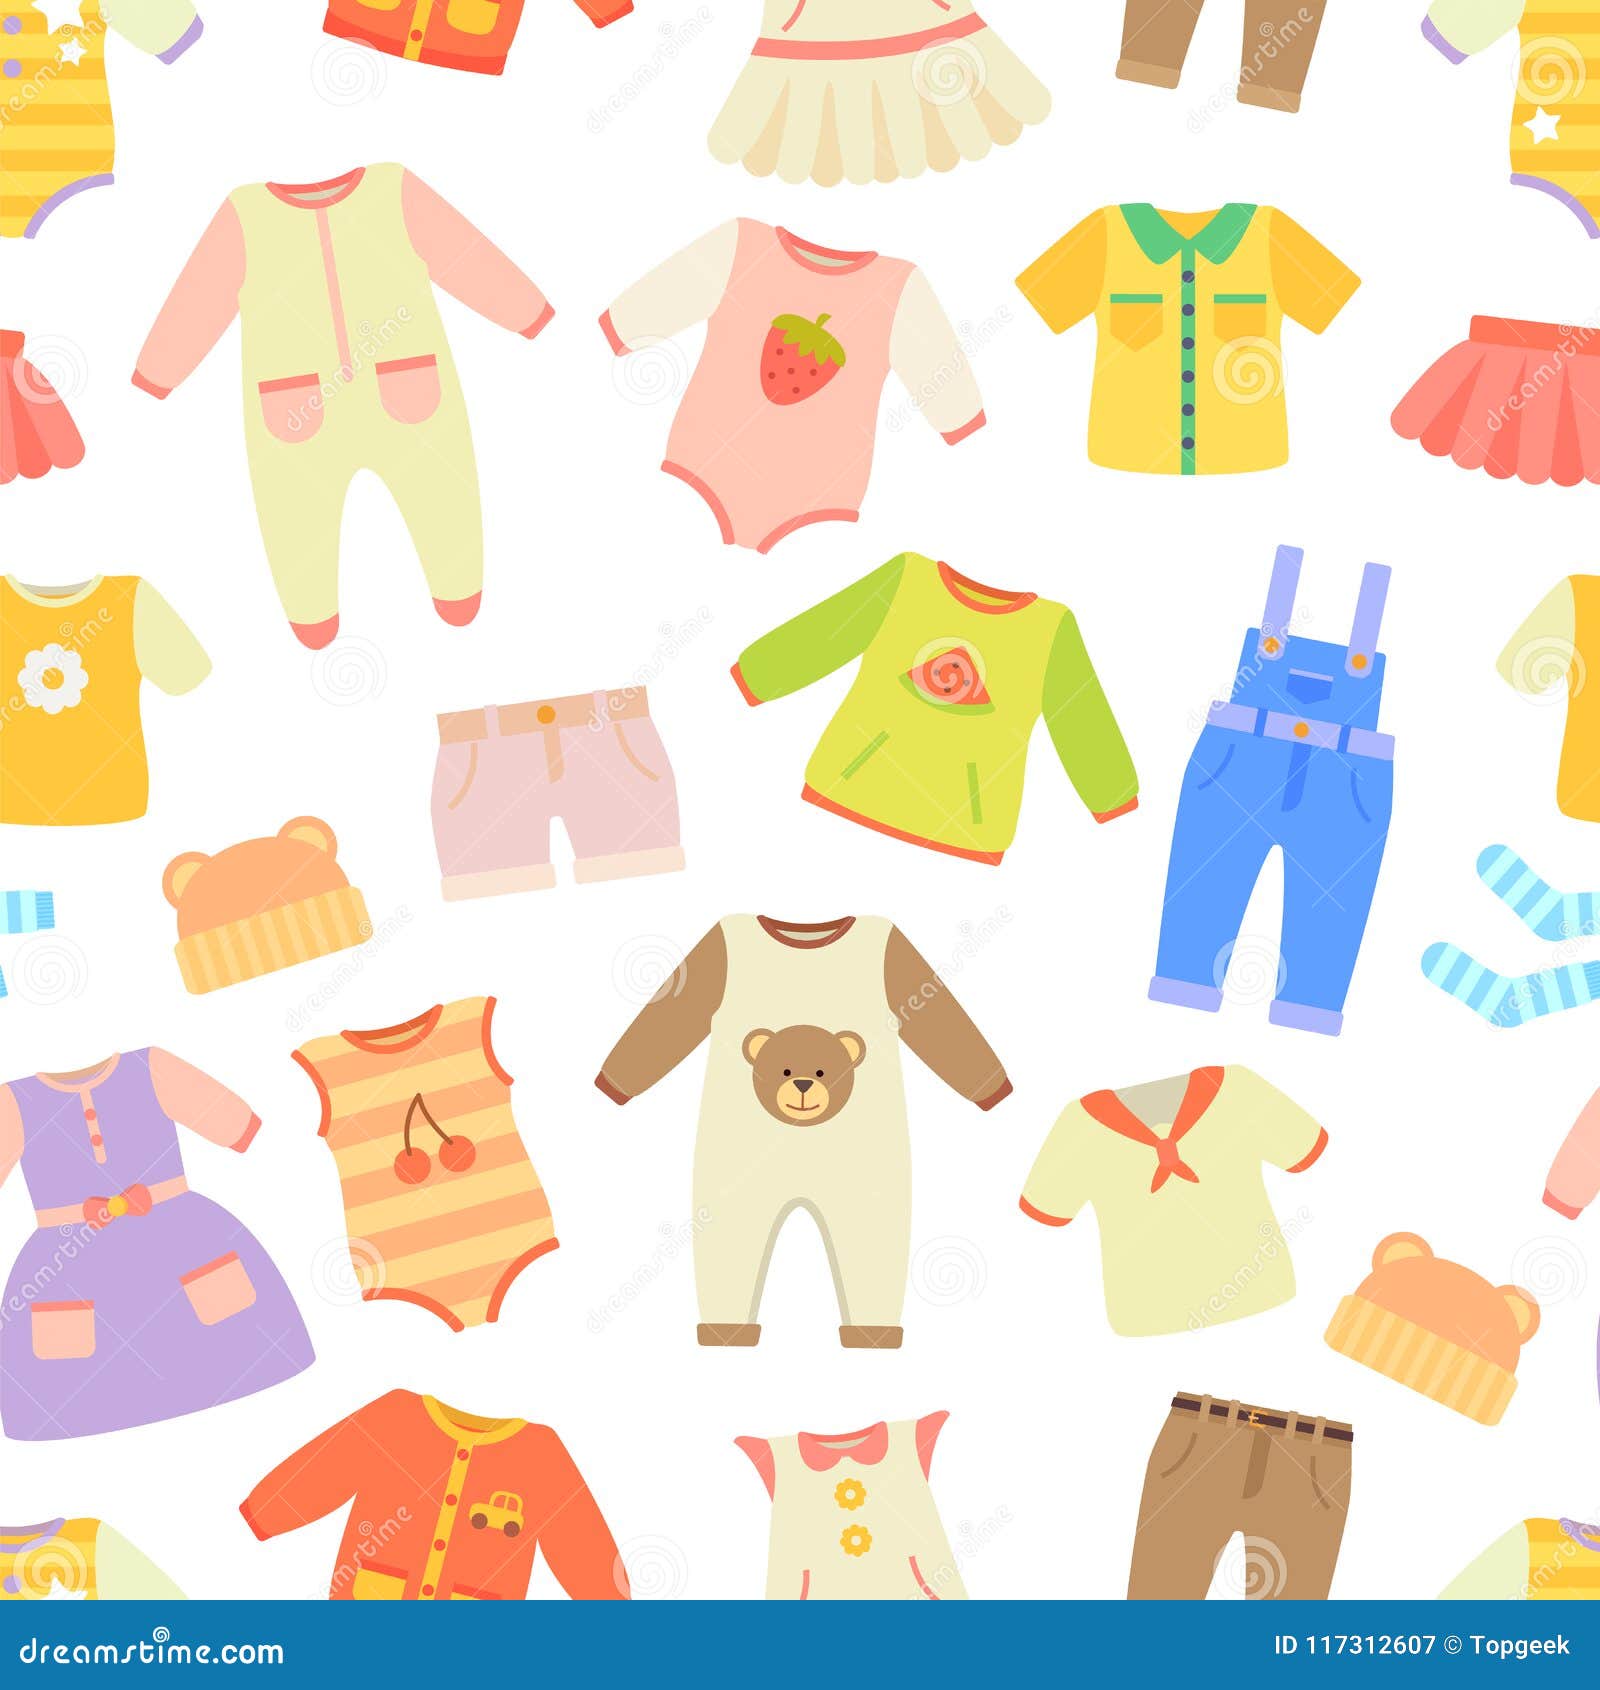 Baby Clothes Seamless Pattern Vector Illustration Stock Vector ...